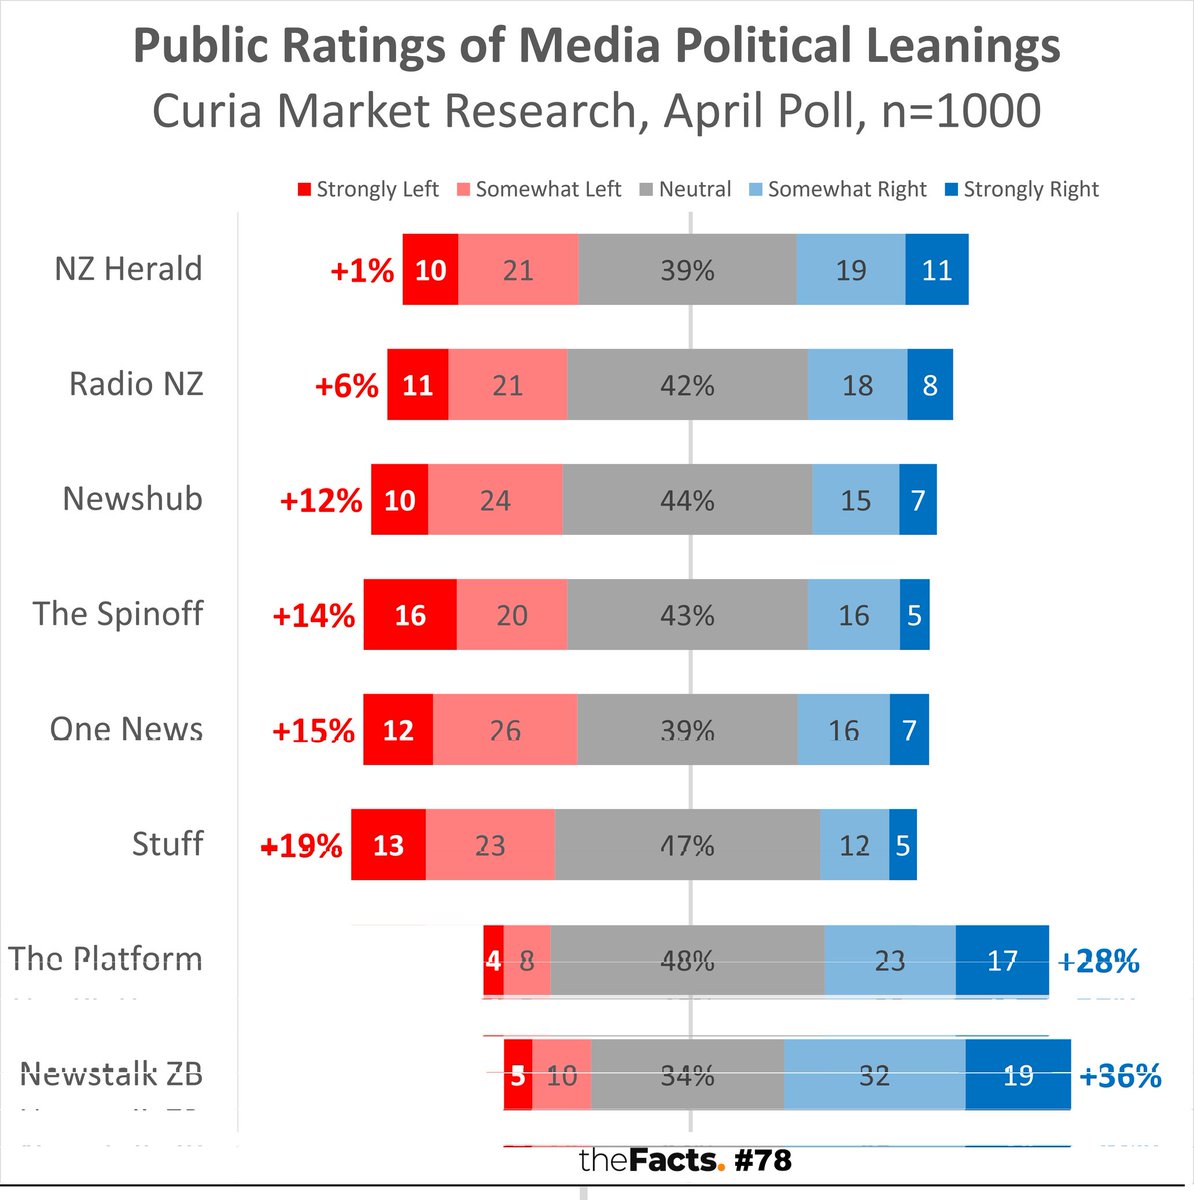 Clearly, STUFF is the answer to fixing Newshubs bias and trustworthiness issues...

This won't end well. Failure is imminent.

#nzpol